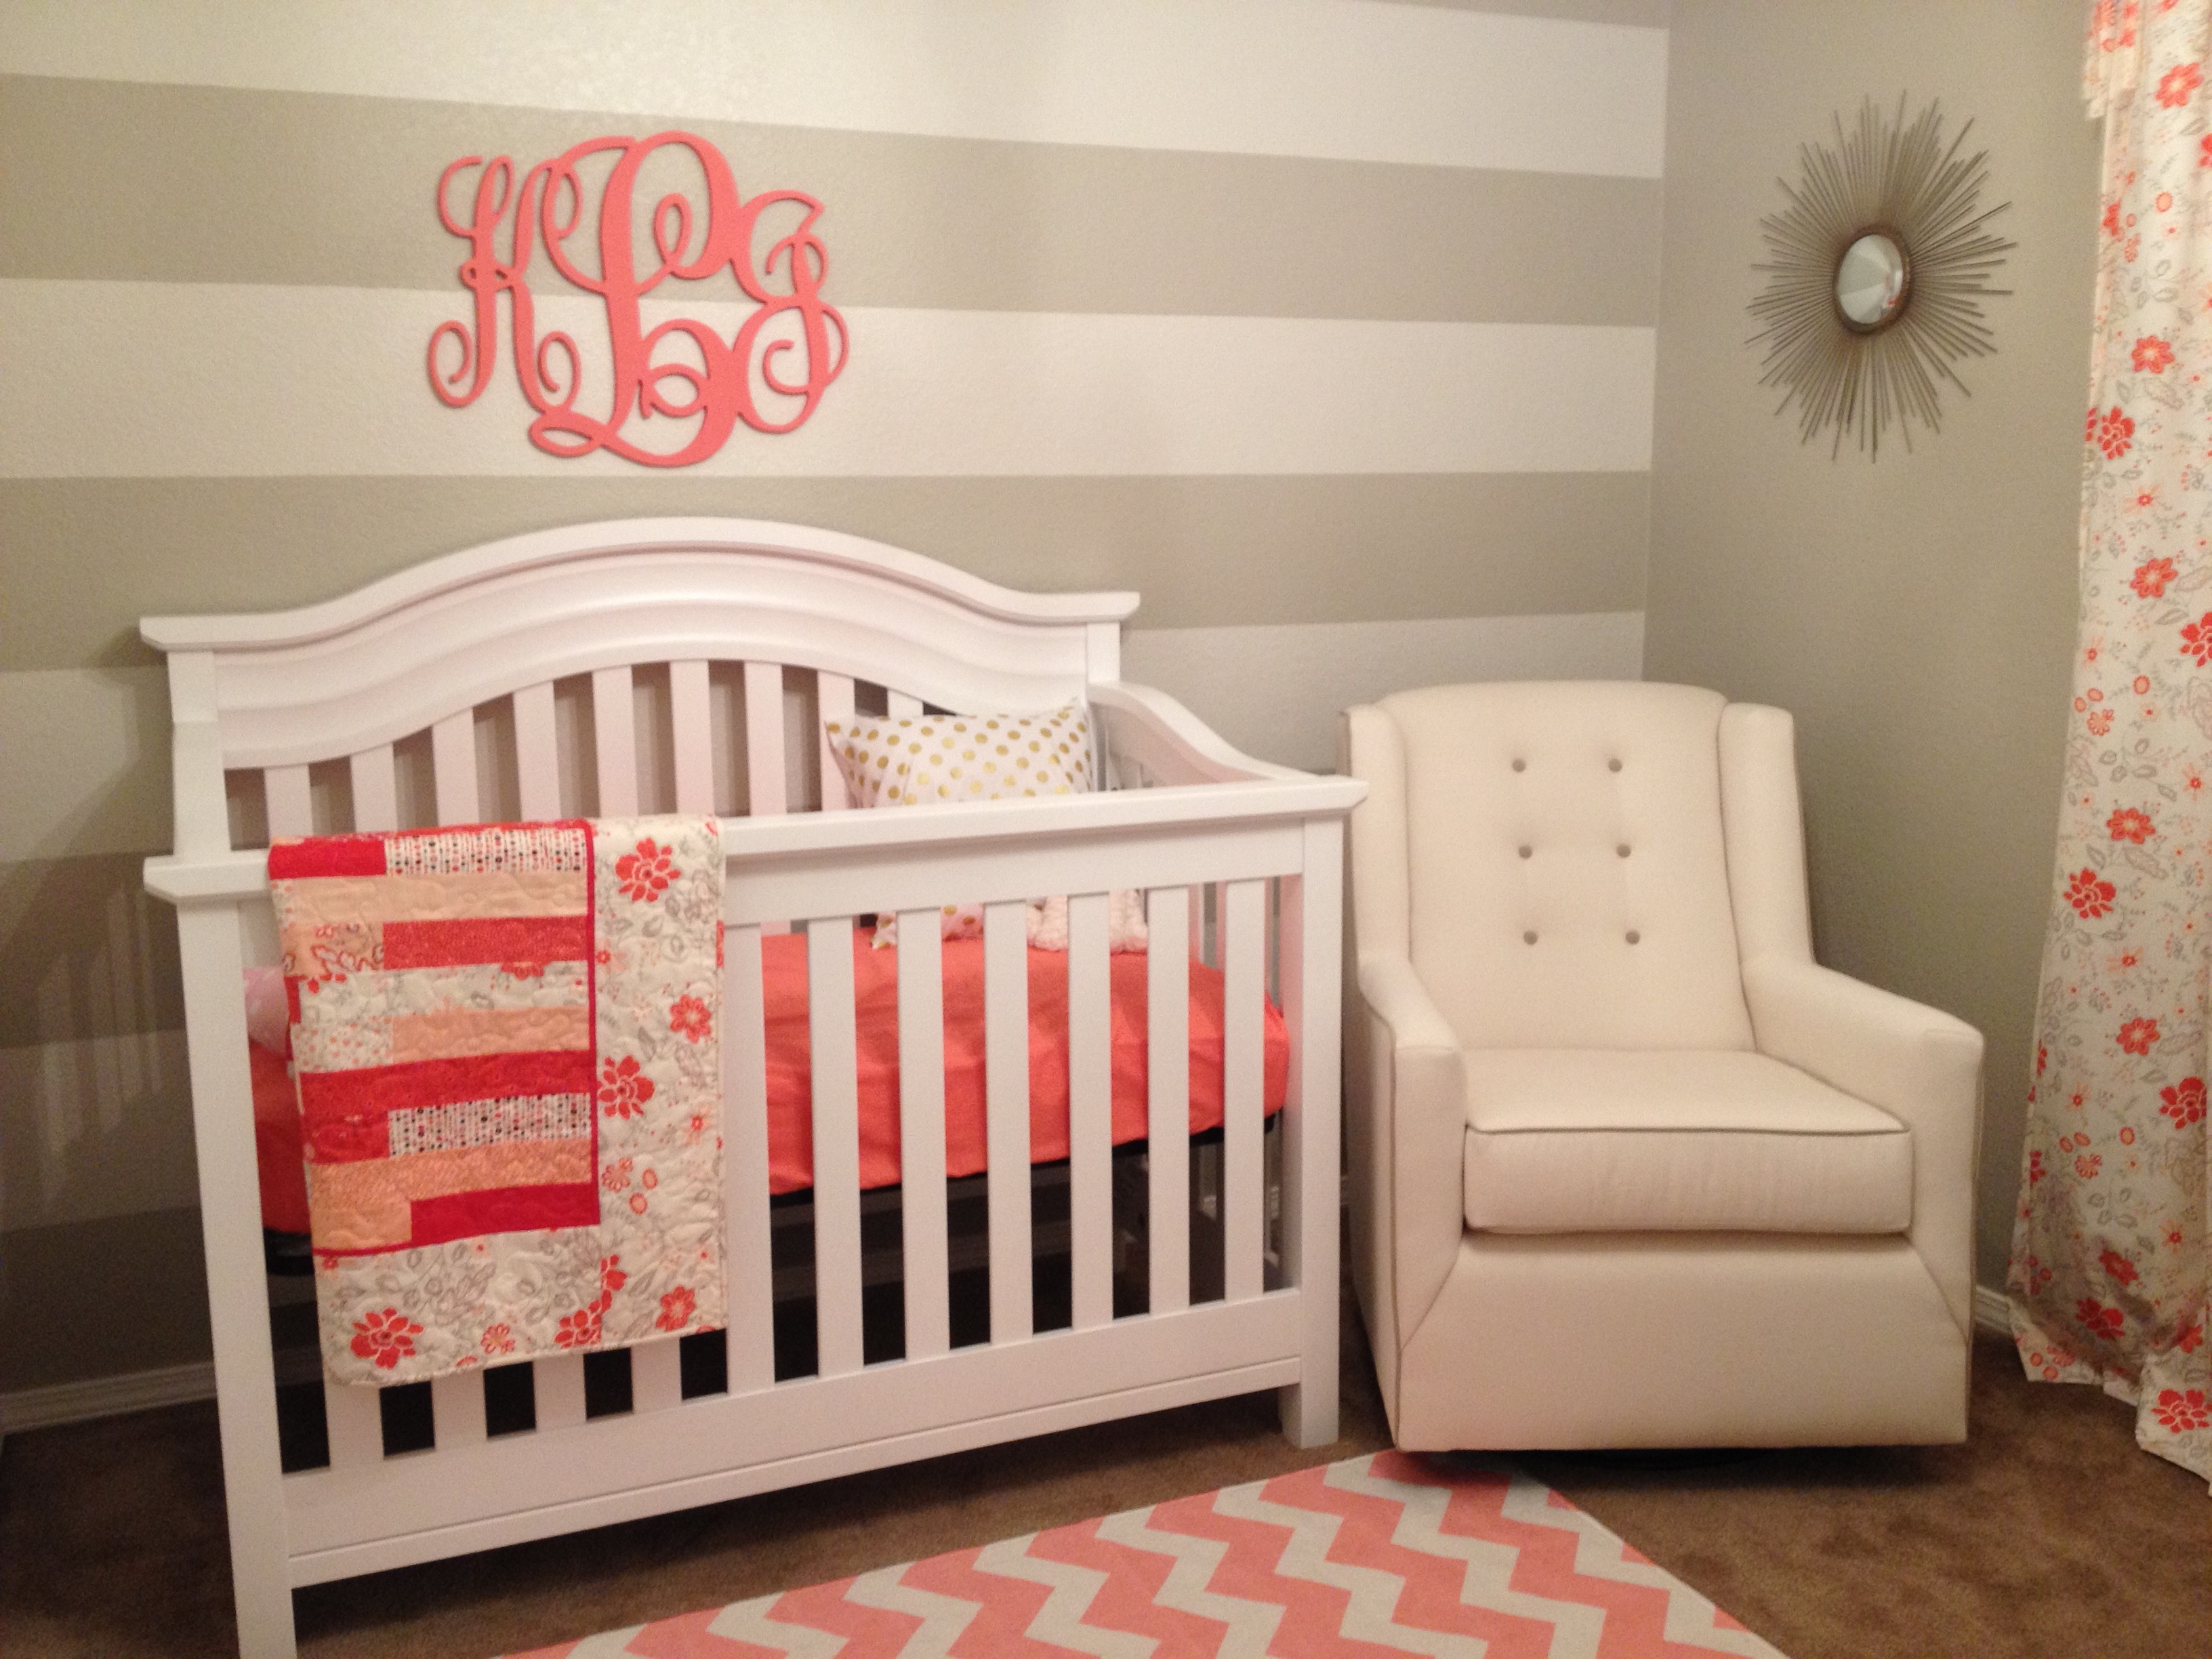 Coral and Taupe Nursery